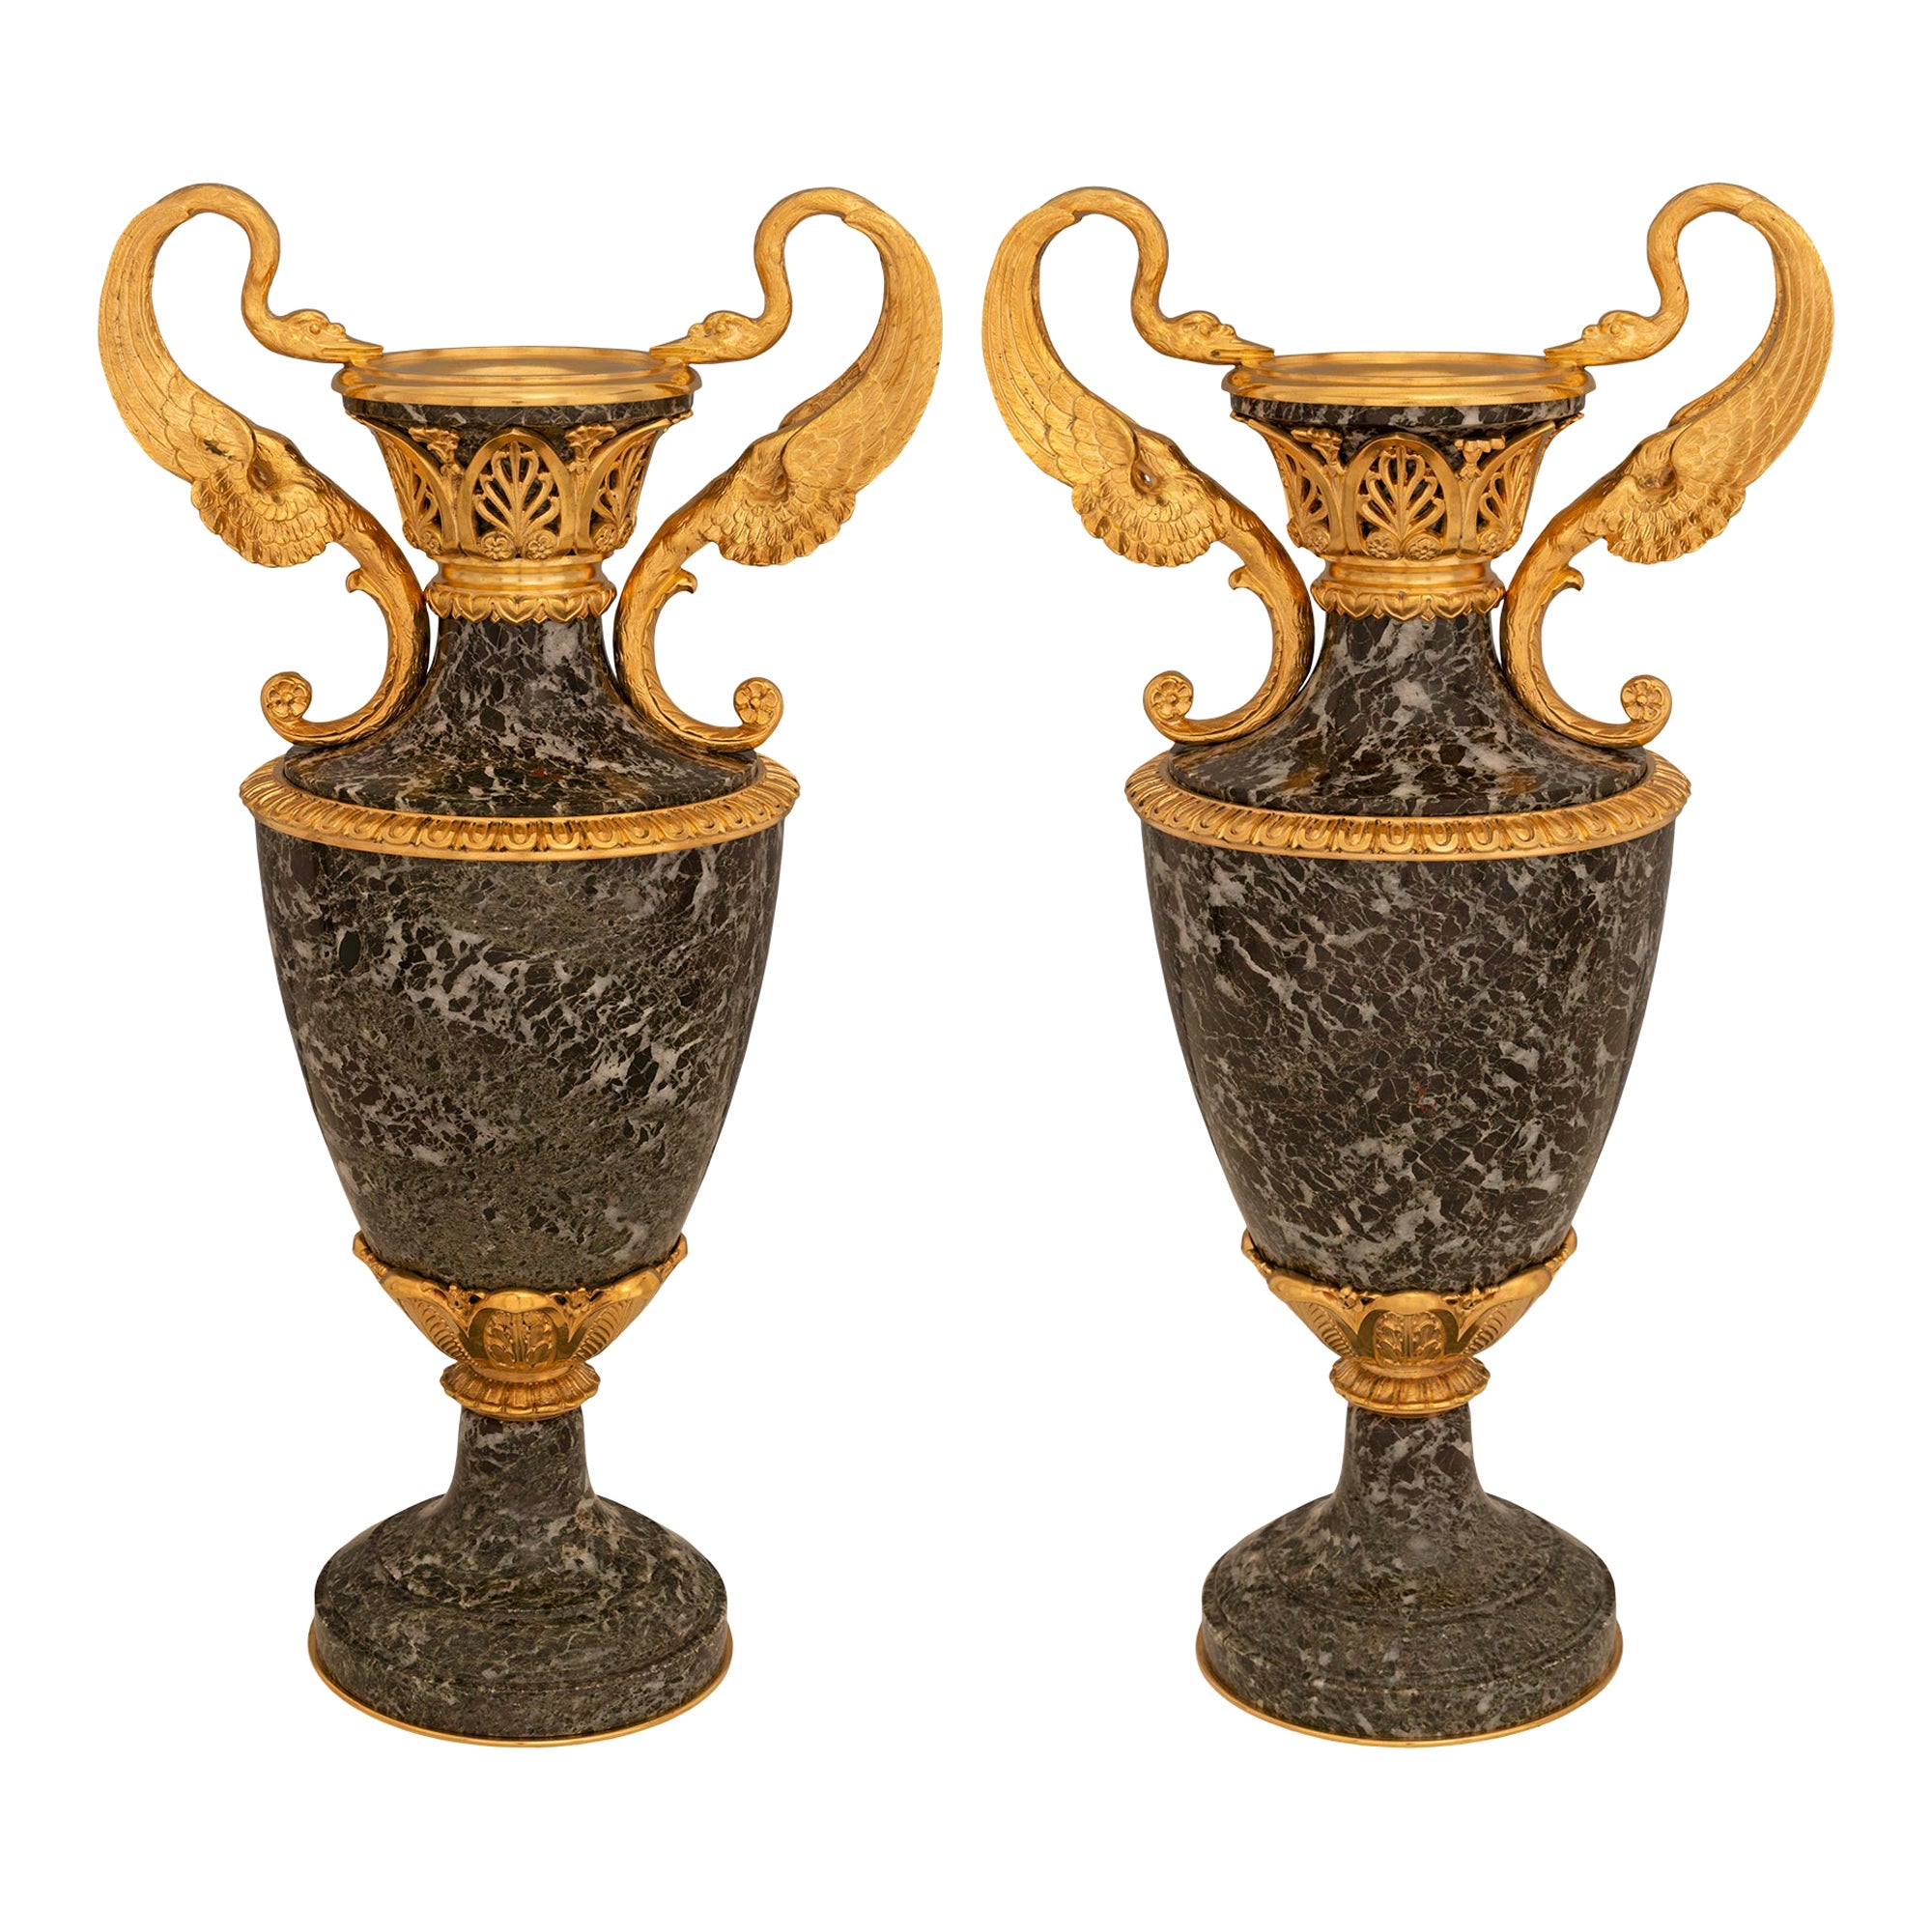 Pair Of French 19th Century Belle Époque Period Green Marble & Ormolu Urns For Sale